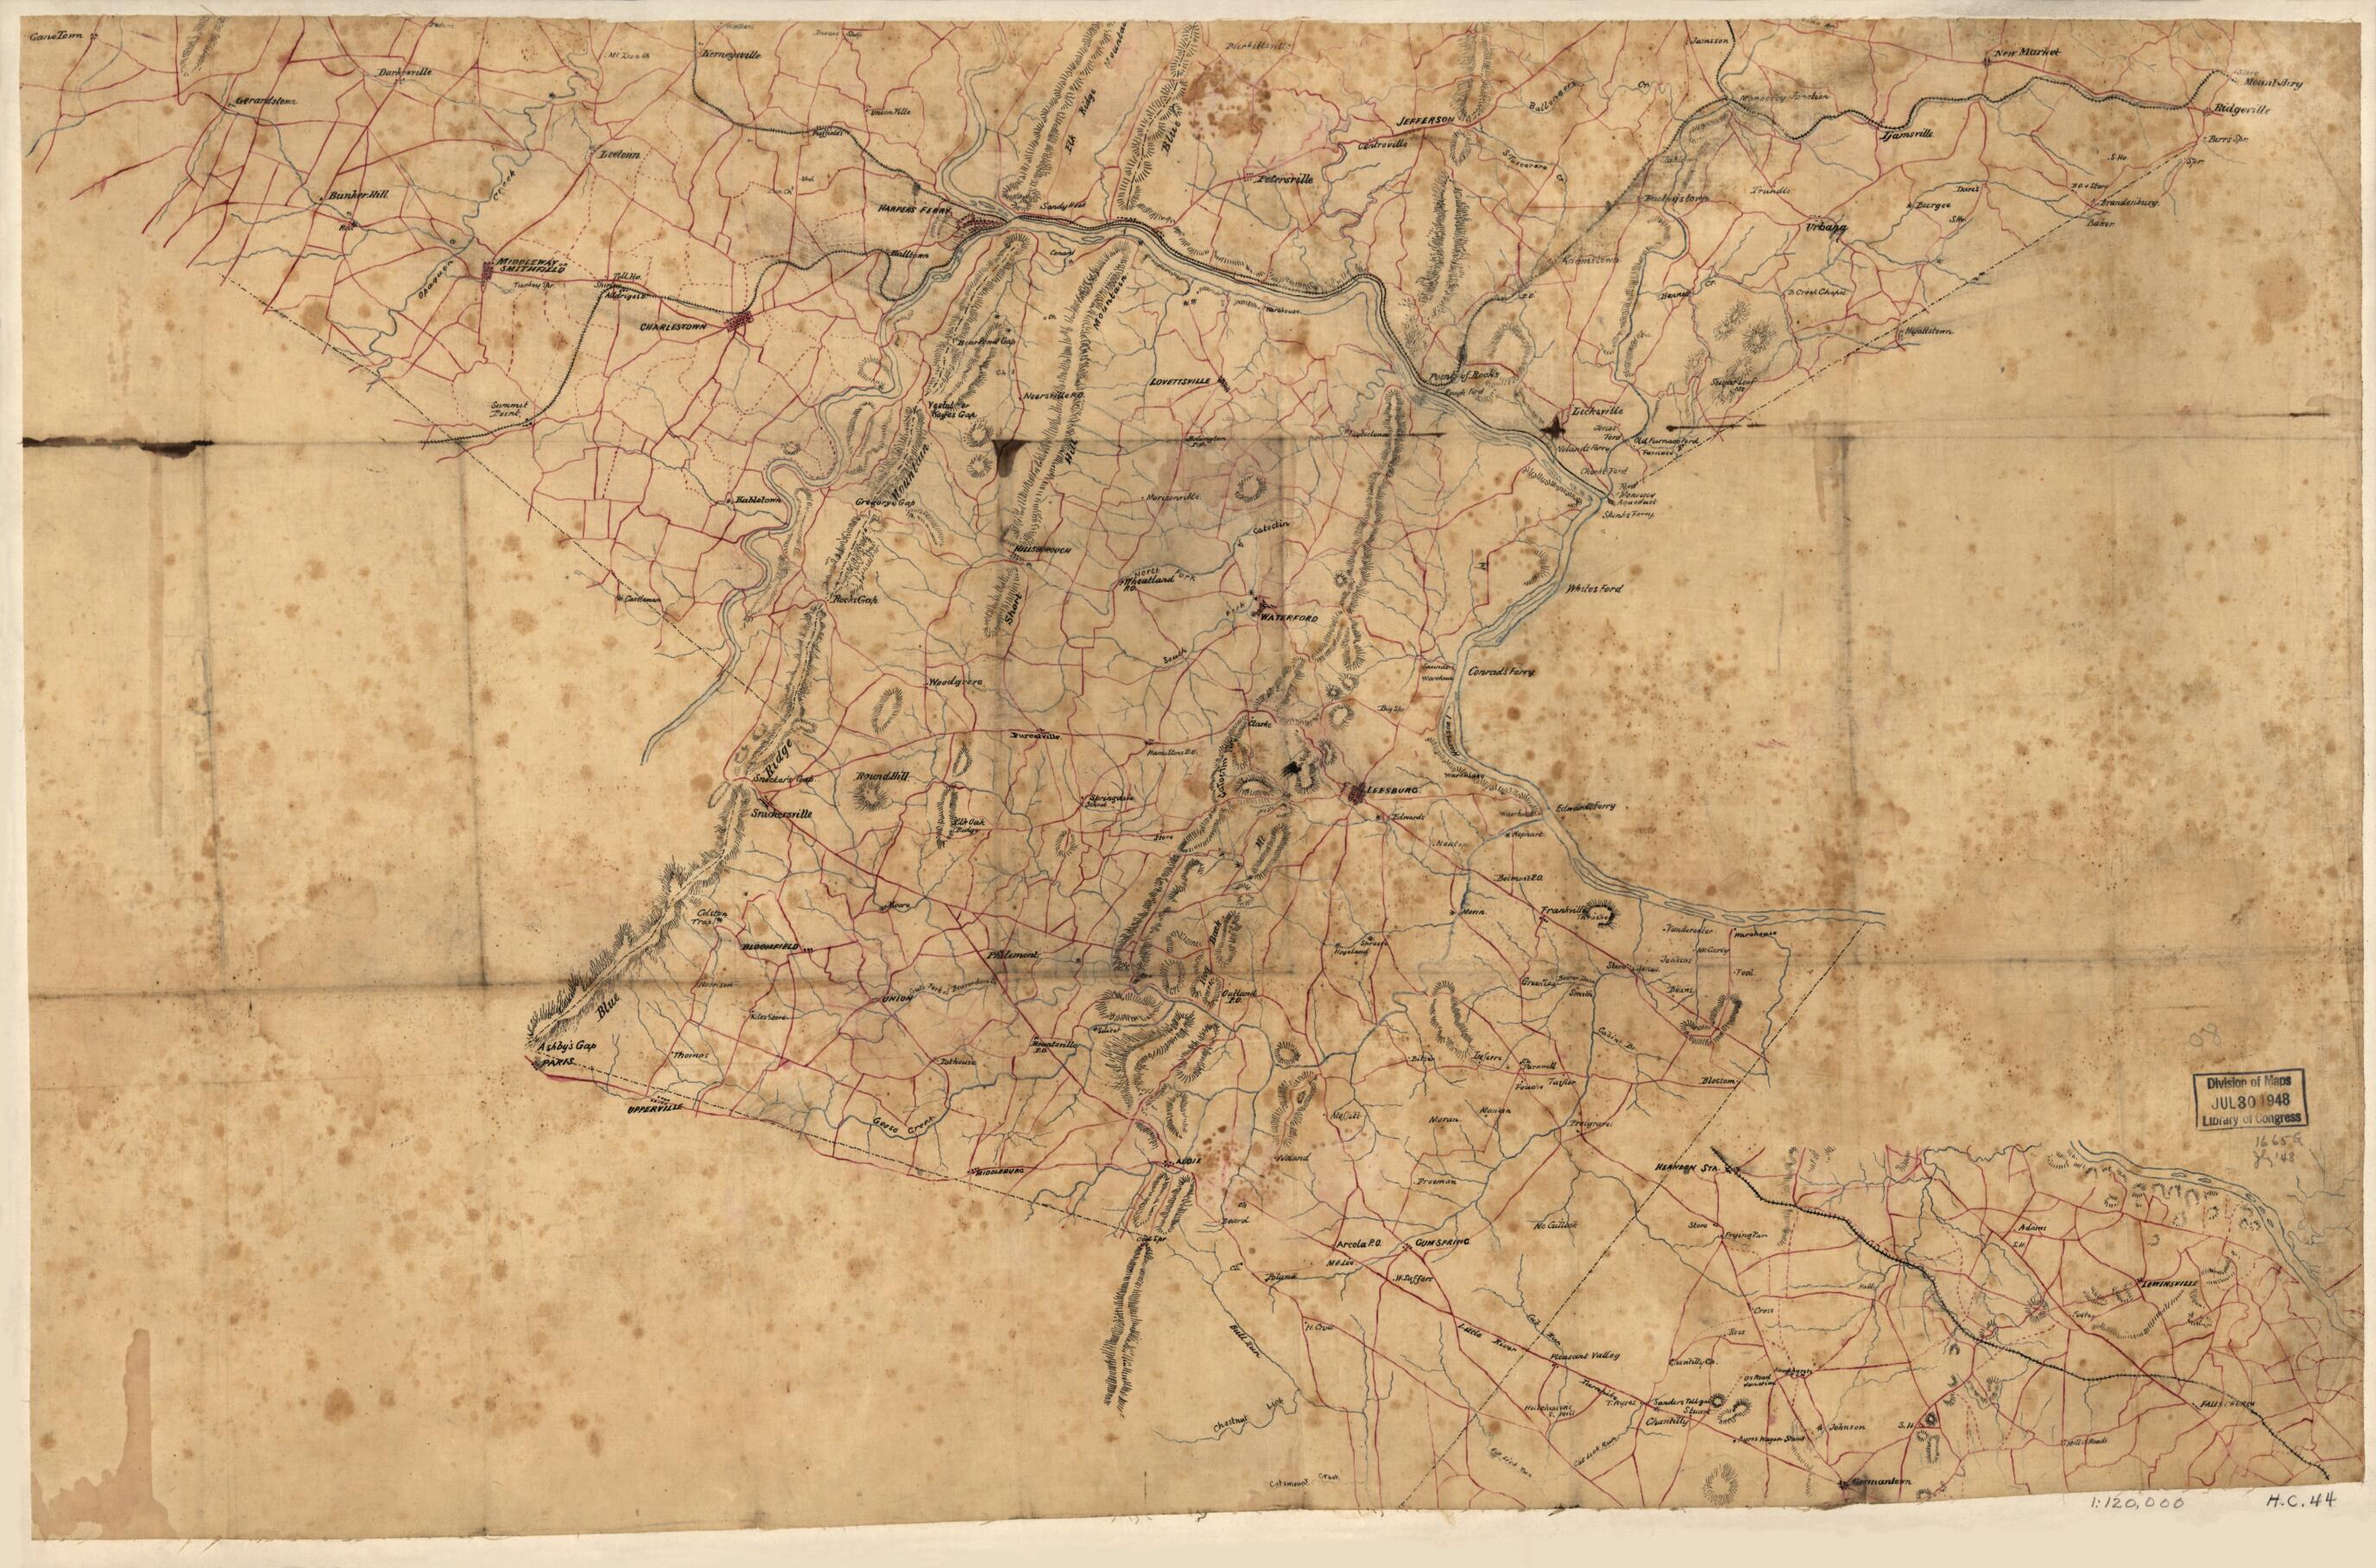 This old map of Map of Loudoun County, Va., and Parts of Fairfax County, Va., Jefferson County, W.Va., and Washington and Frederick Counties, Md. from 1860 was created by  in 1860